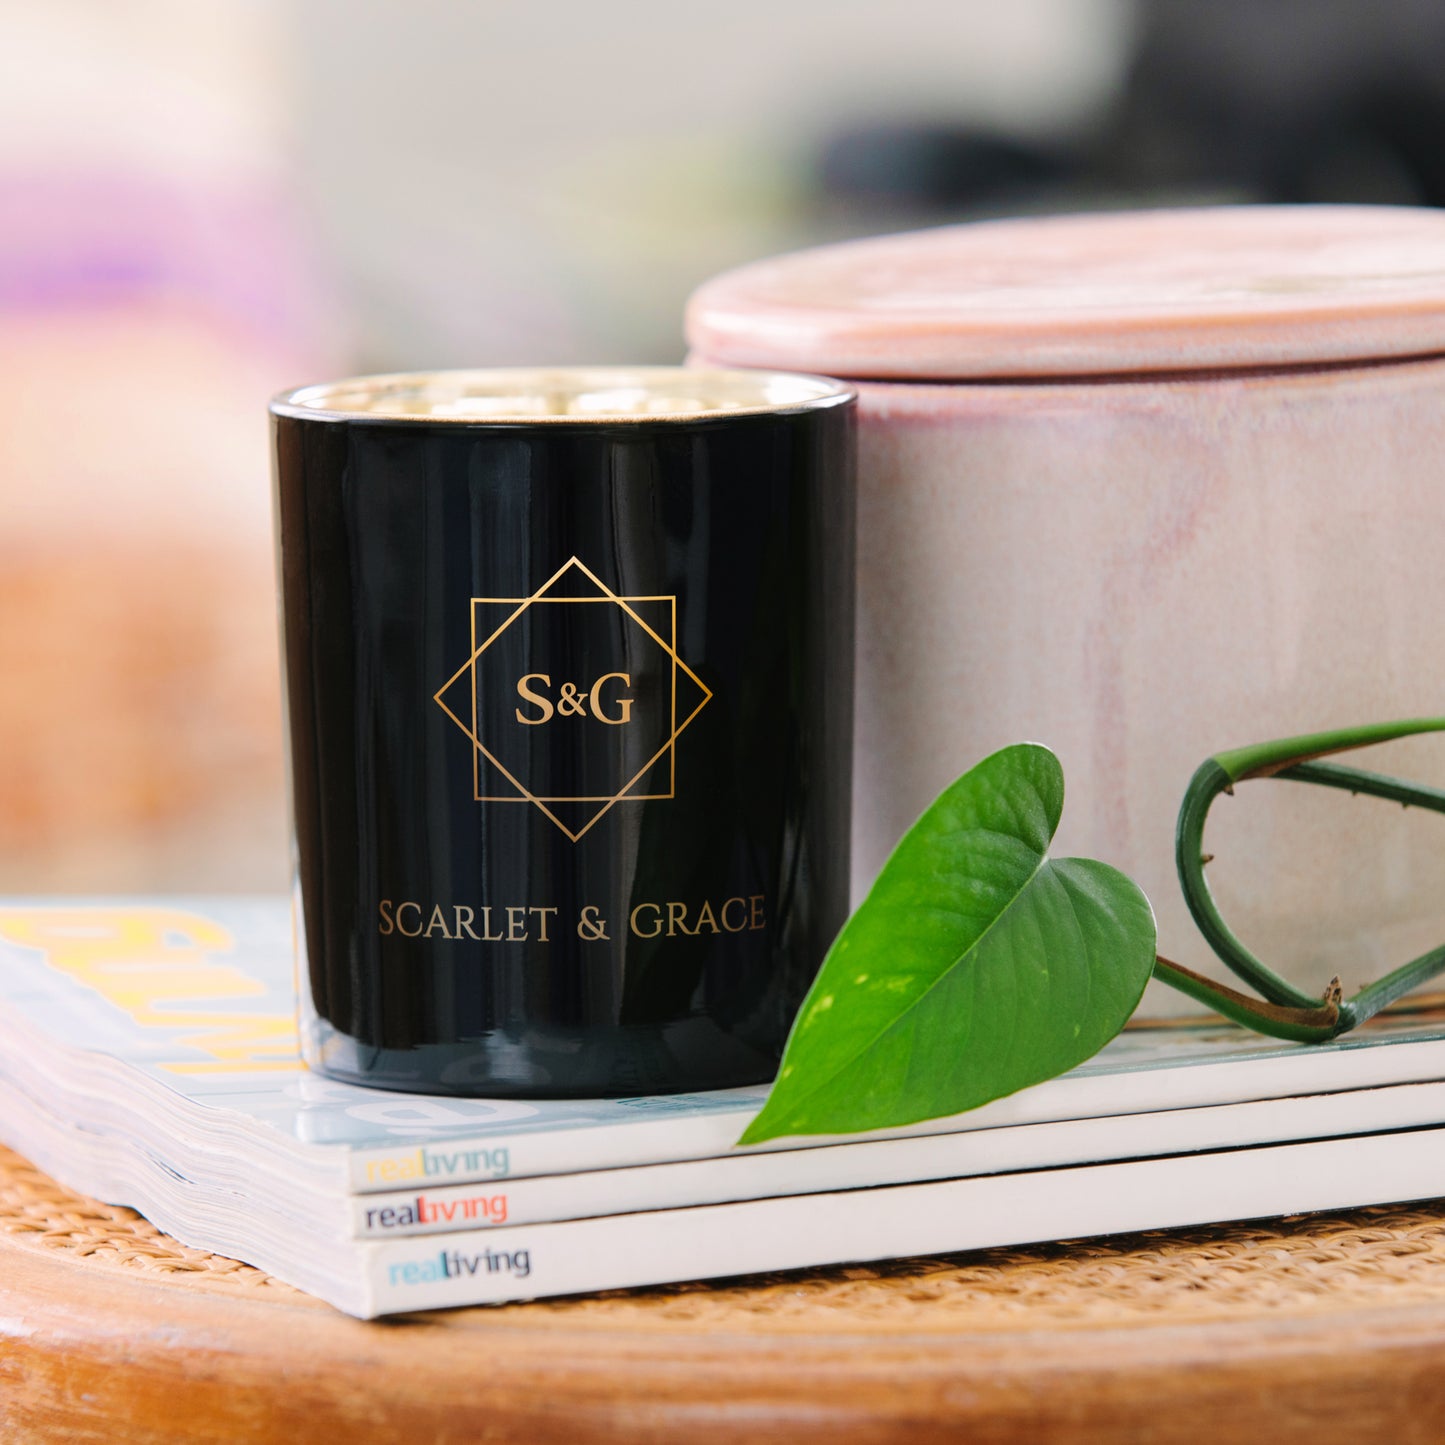 Summer Sorbet - 340gm Soy Wax Candle - Scarlet & Grace